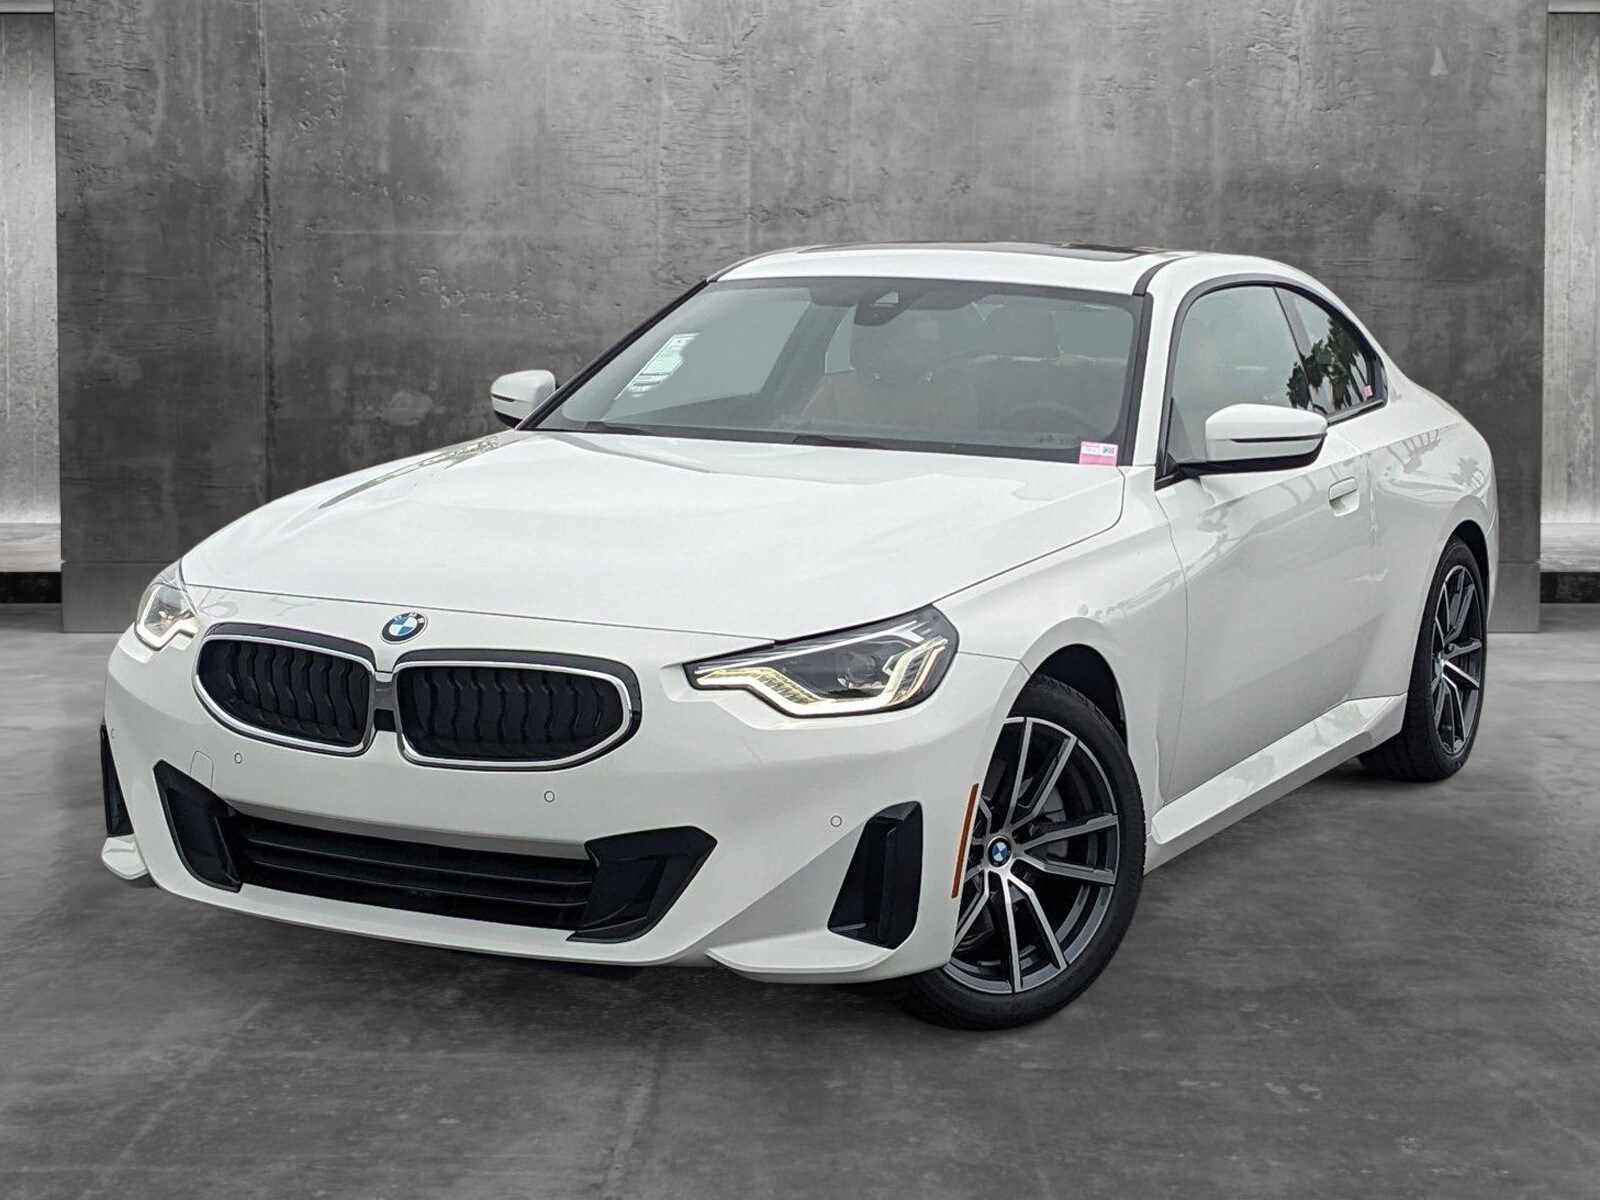 Cars For Sale Buena Park, CA | BMW of Buena Park